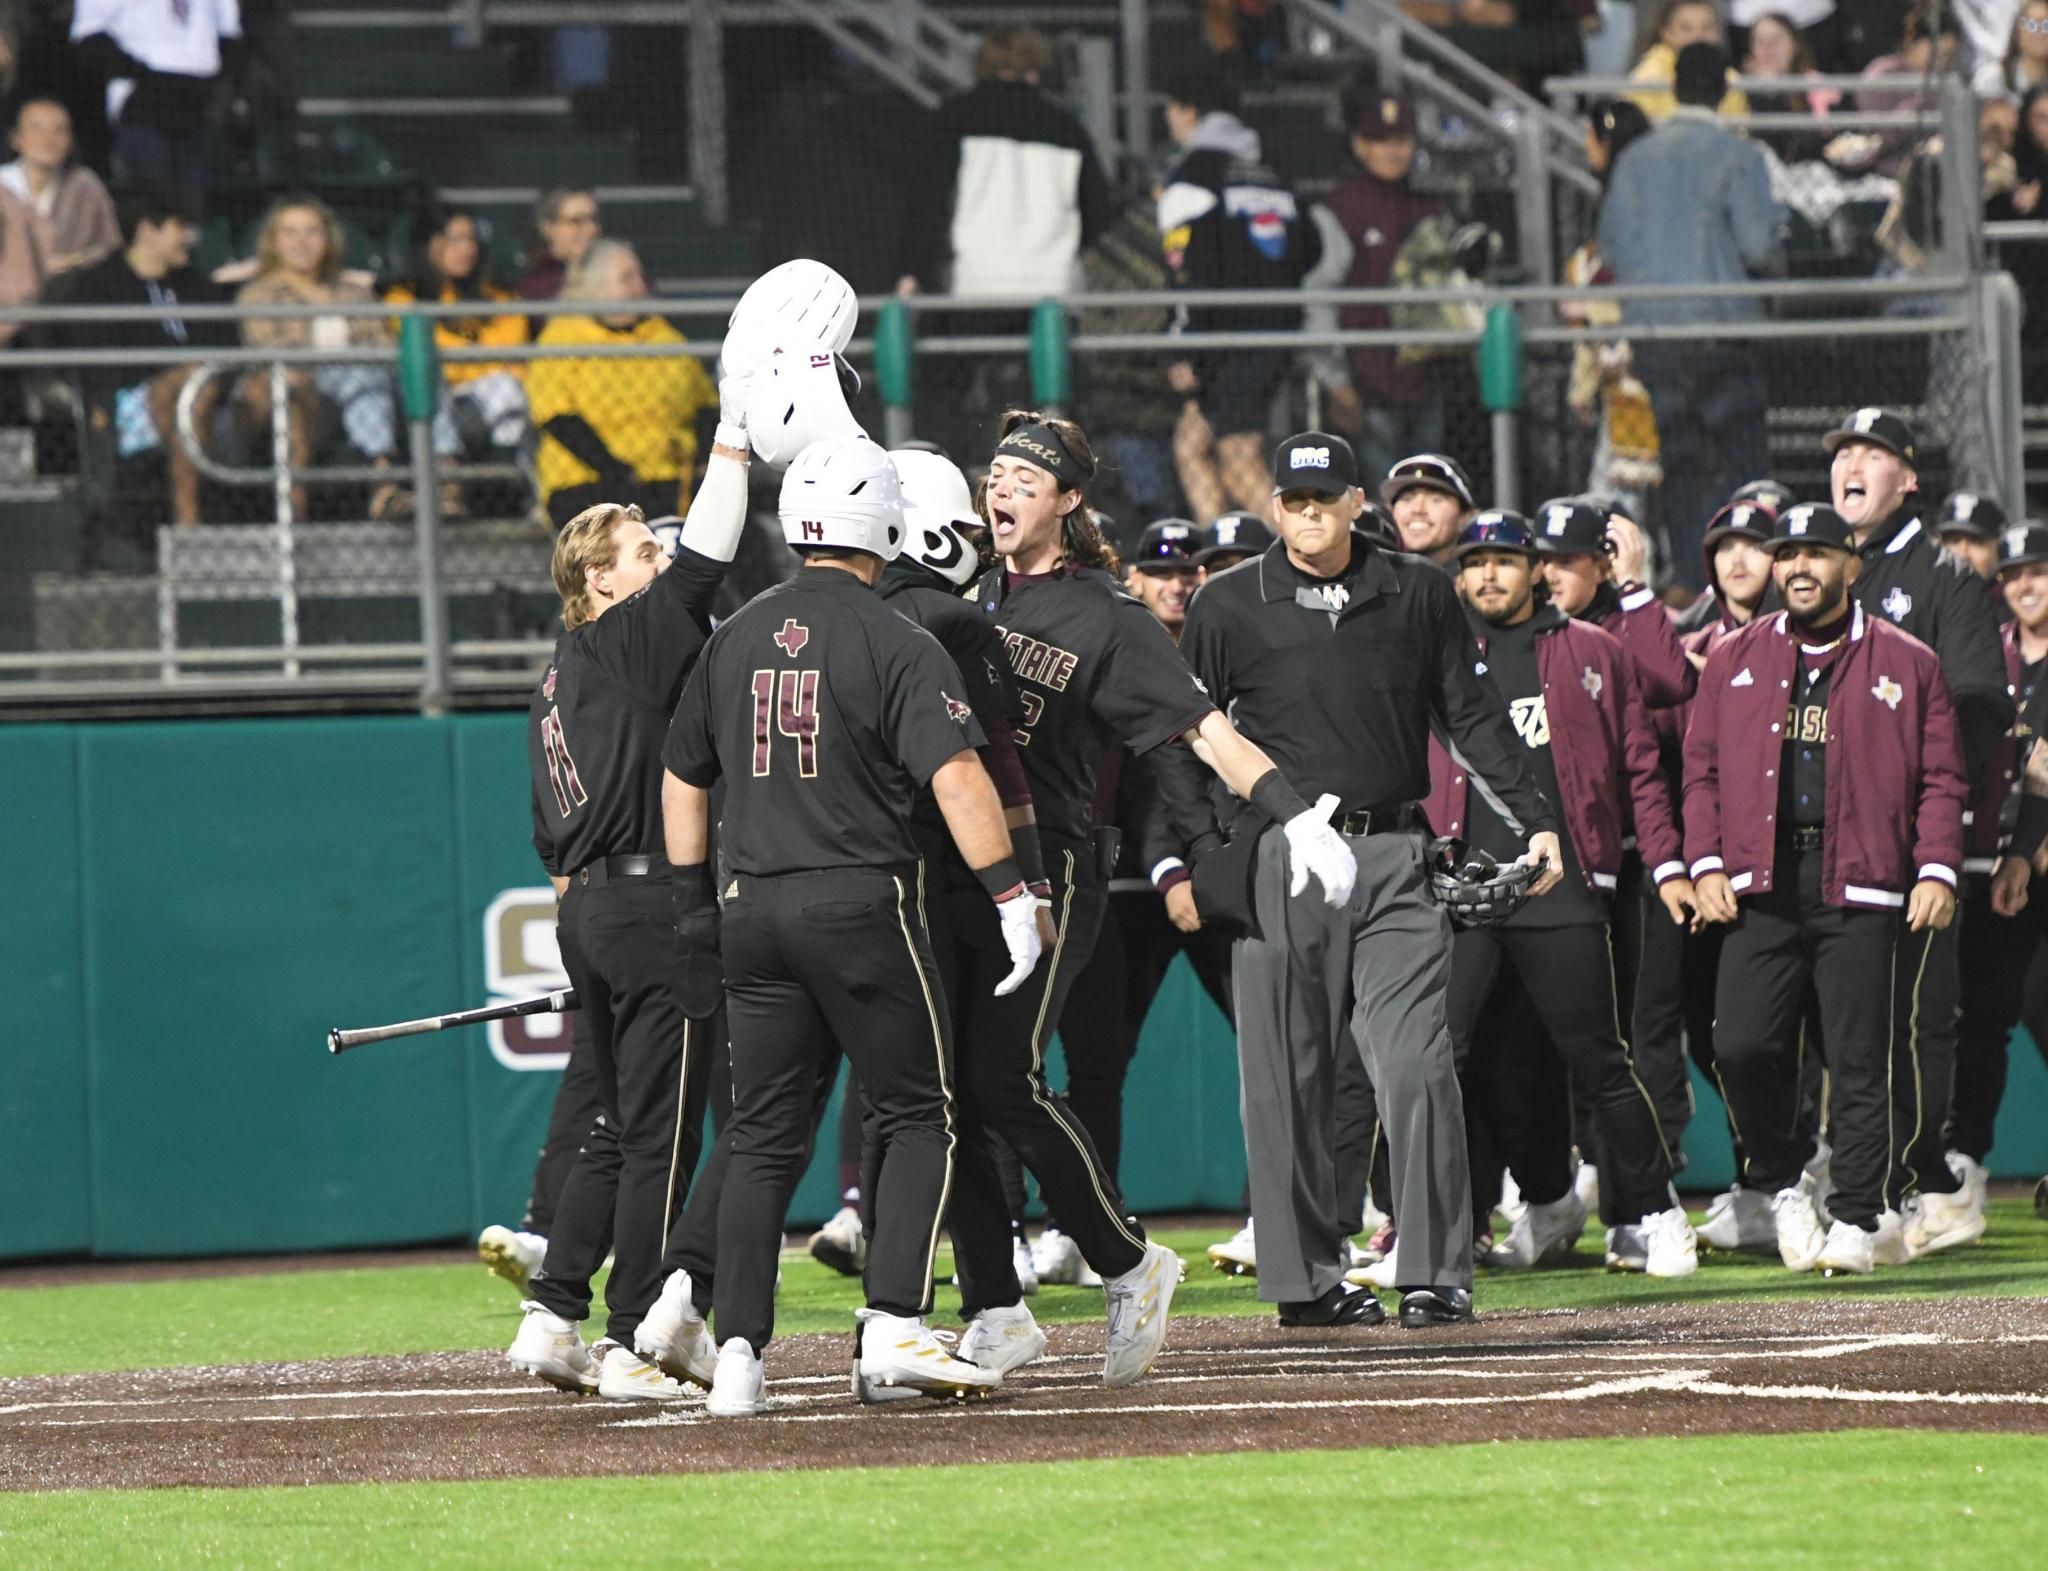 Texas State dominates Northwestern for Opening Day win